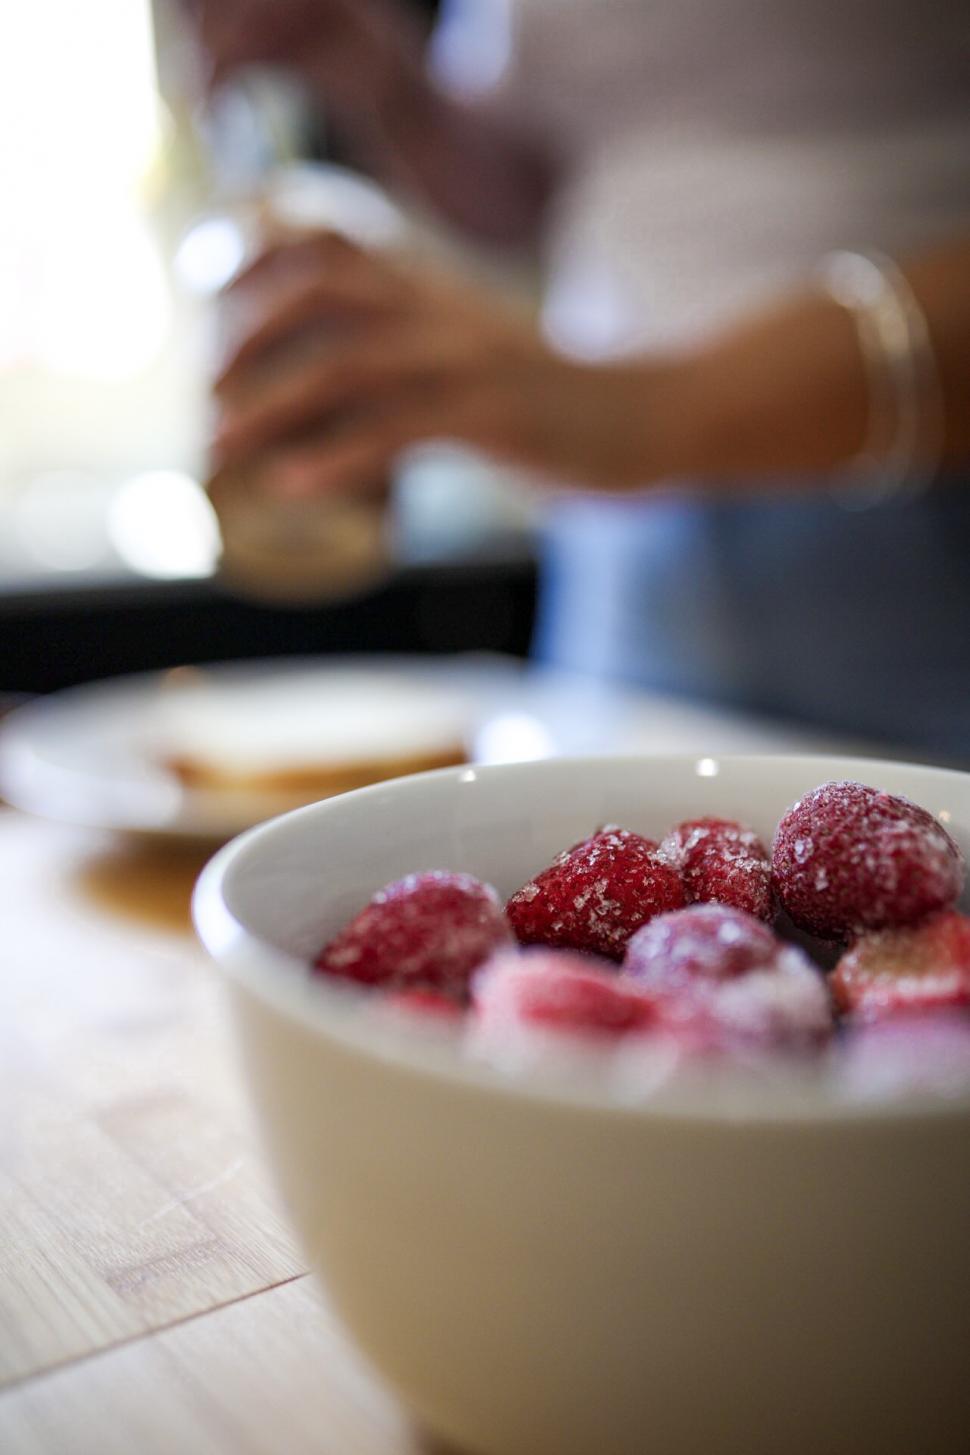 Free Image of Bowl of Frozen Strawberries 